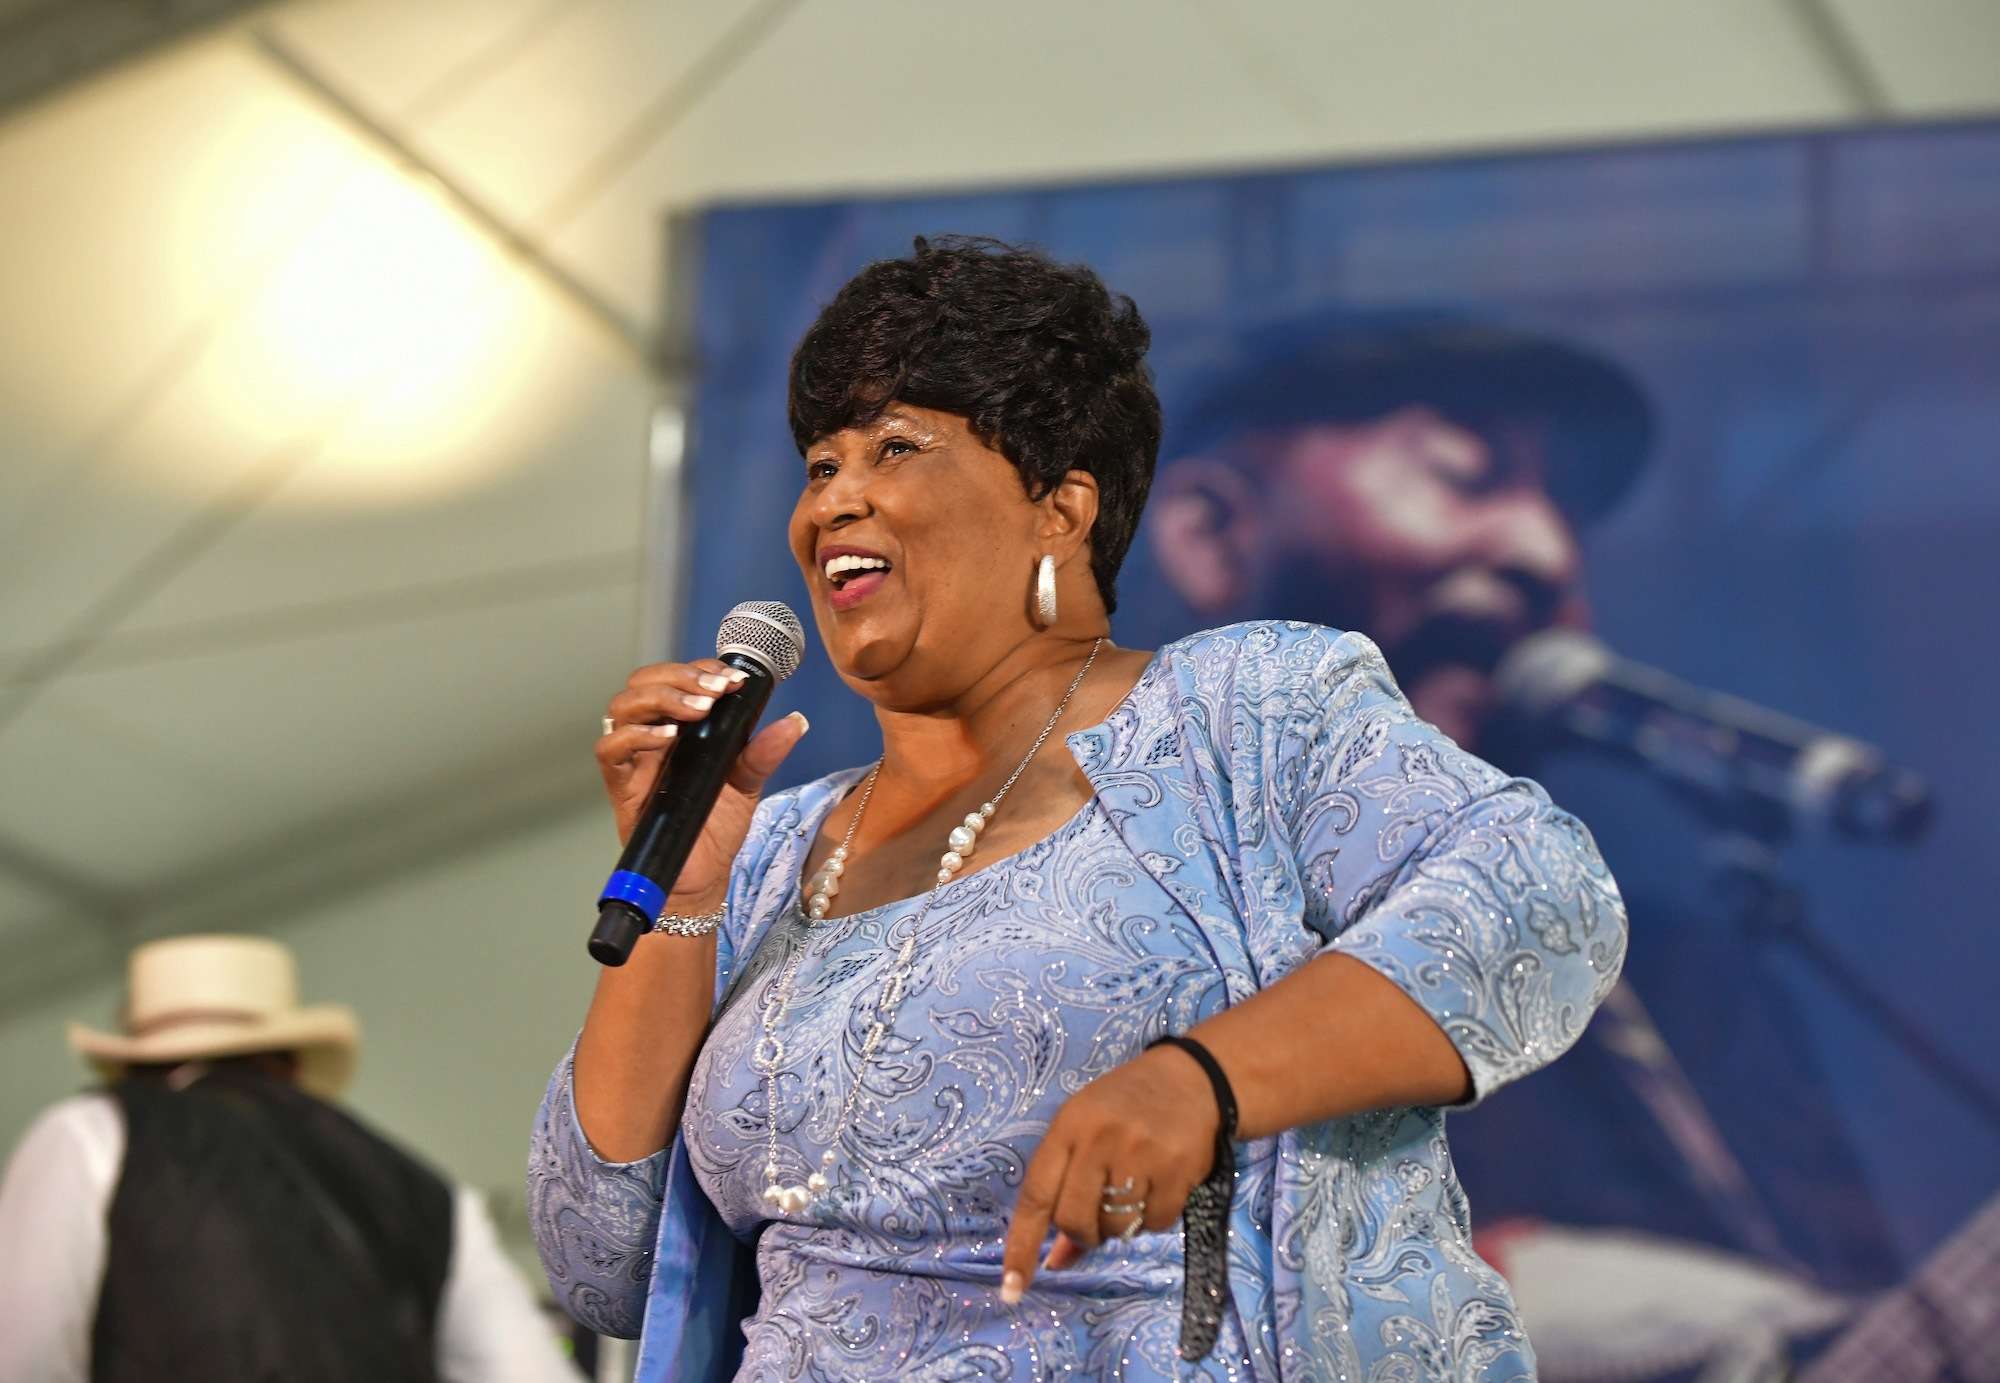 Ms Jody Live At Chicago Blues Fest [GALLERY] 7